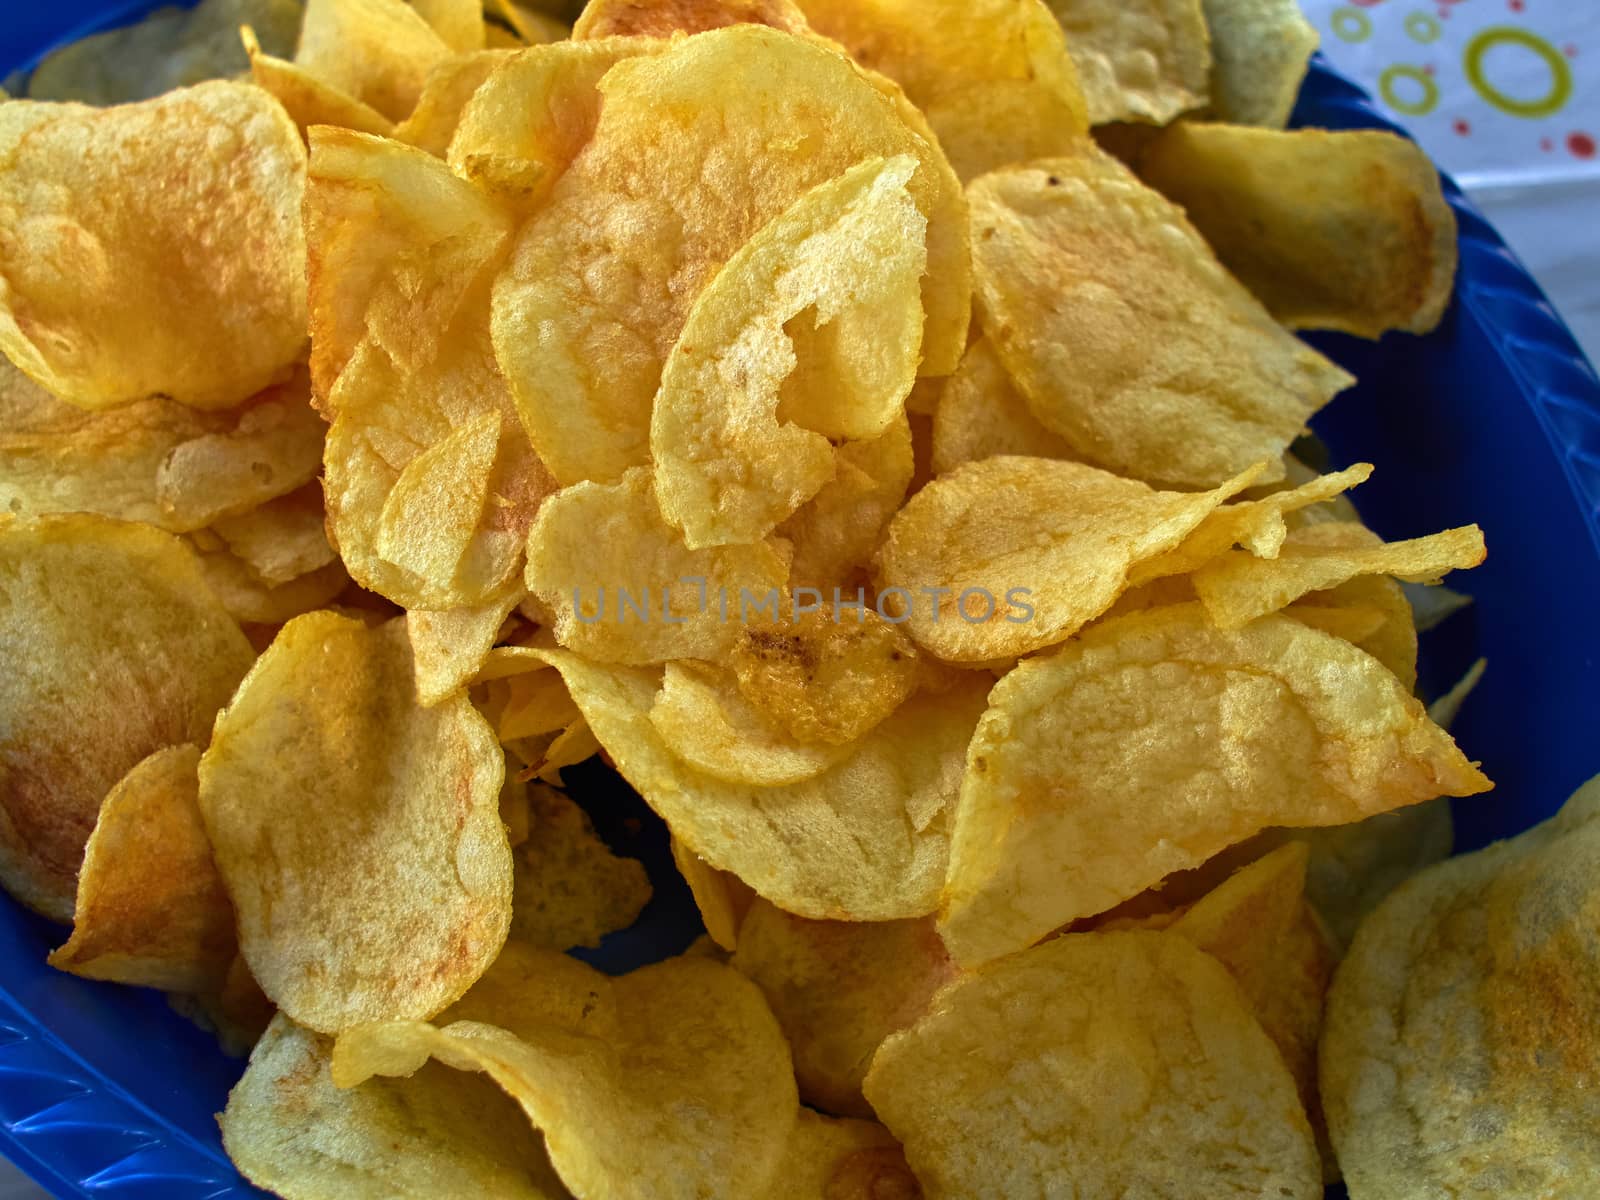 Potato chips crisps in served on a blue plate taken in closeup